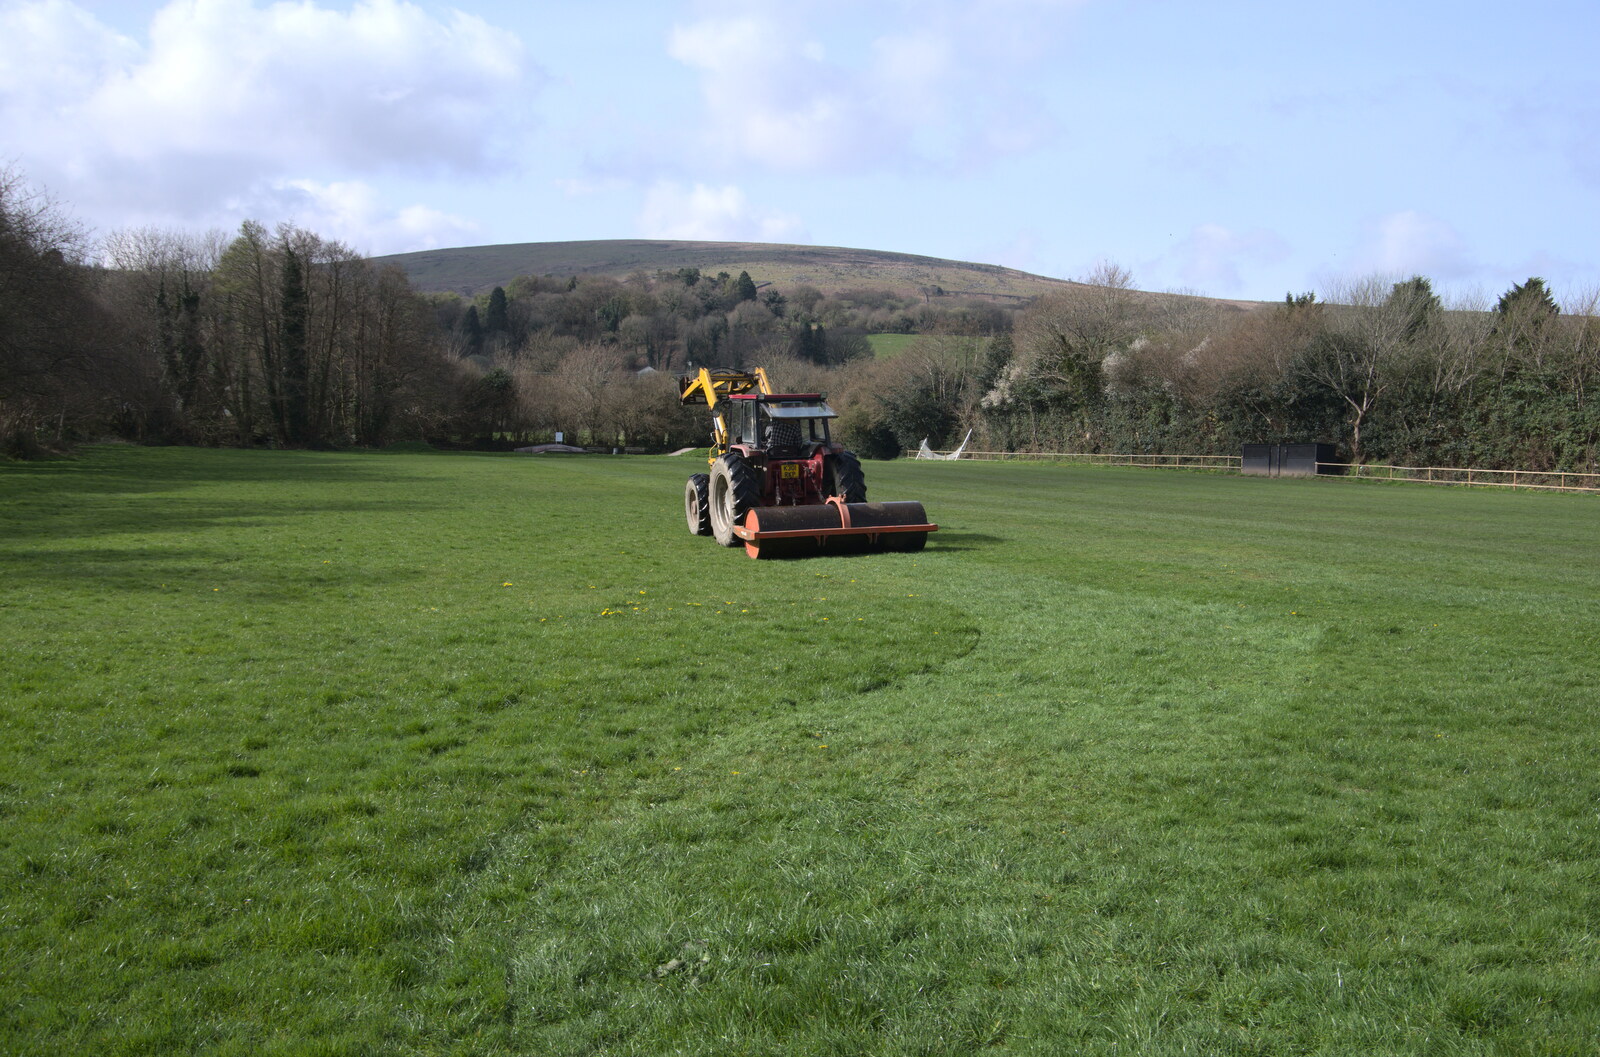 The recreation ground gets rolled from Easter in South Zeal and Moretonhampstead, Devon - 9th April